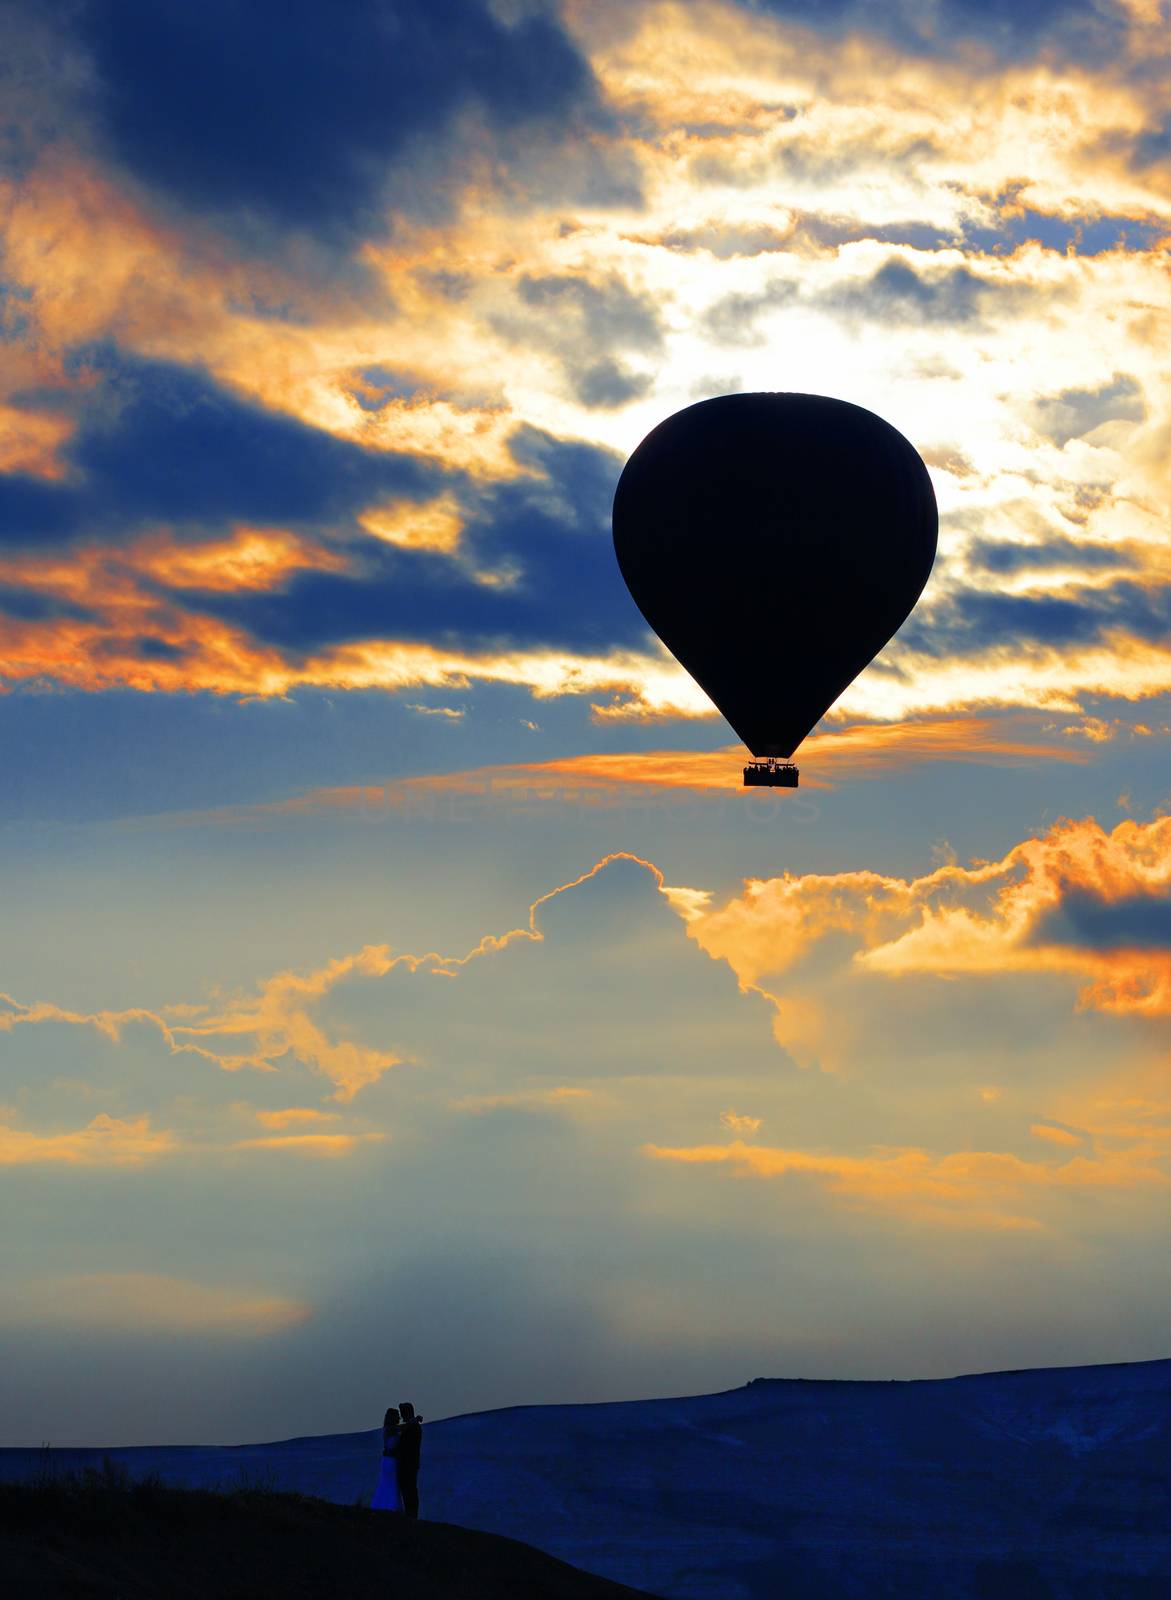 Silhouette of a loving couple and balloon against the morning sky with fiery red clouds by Sergii